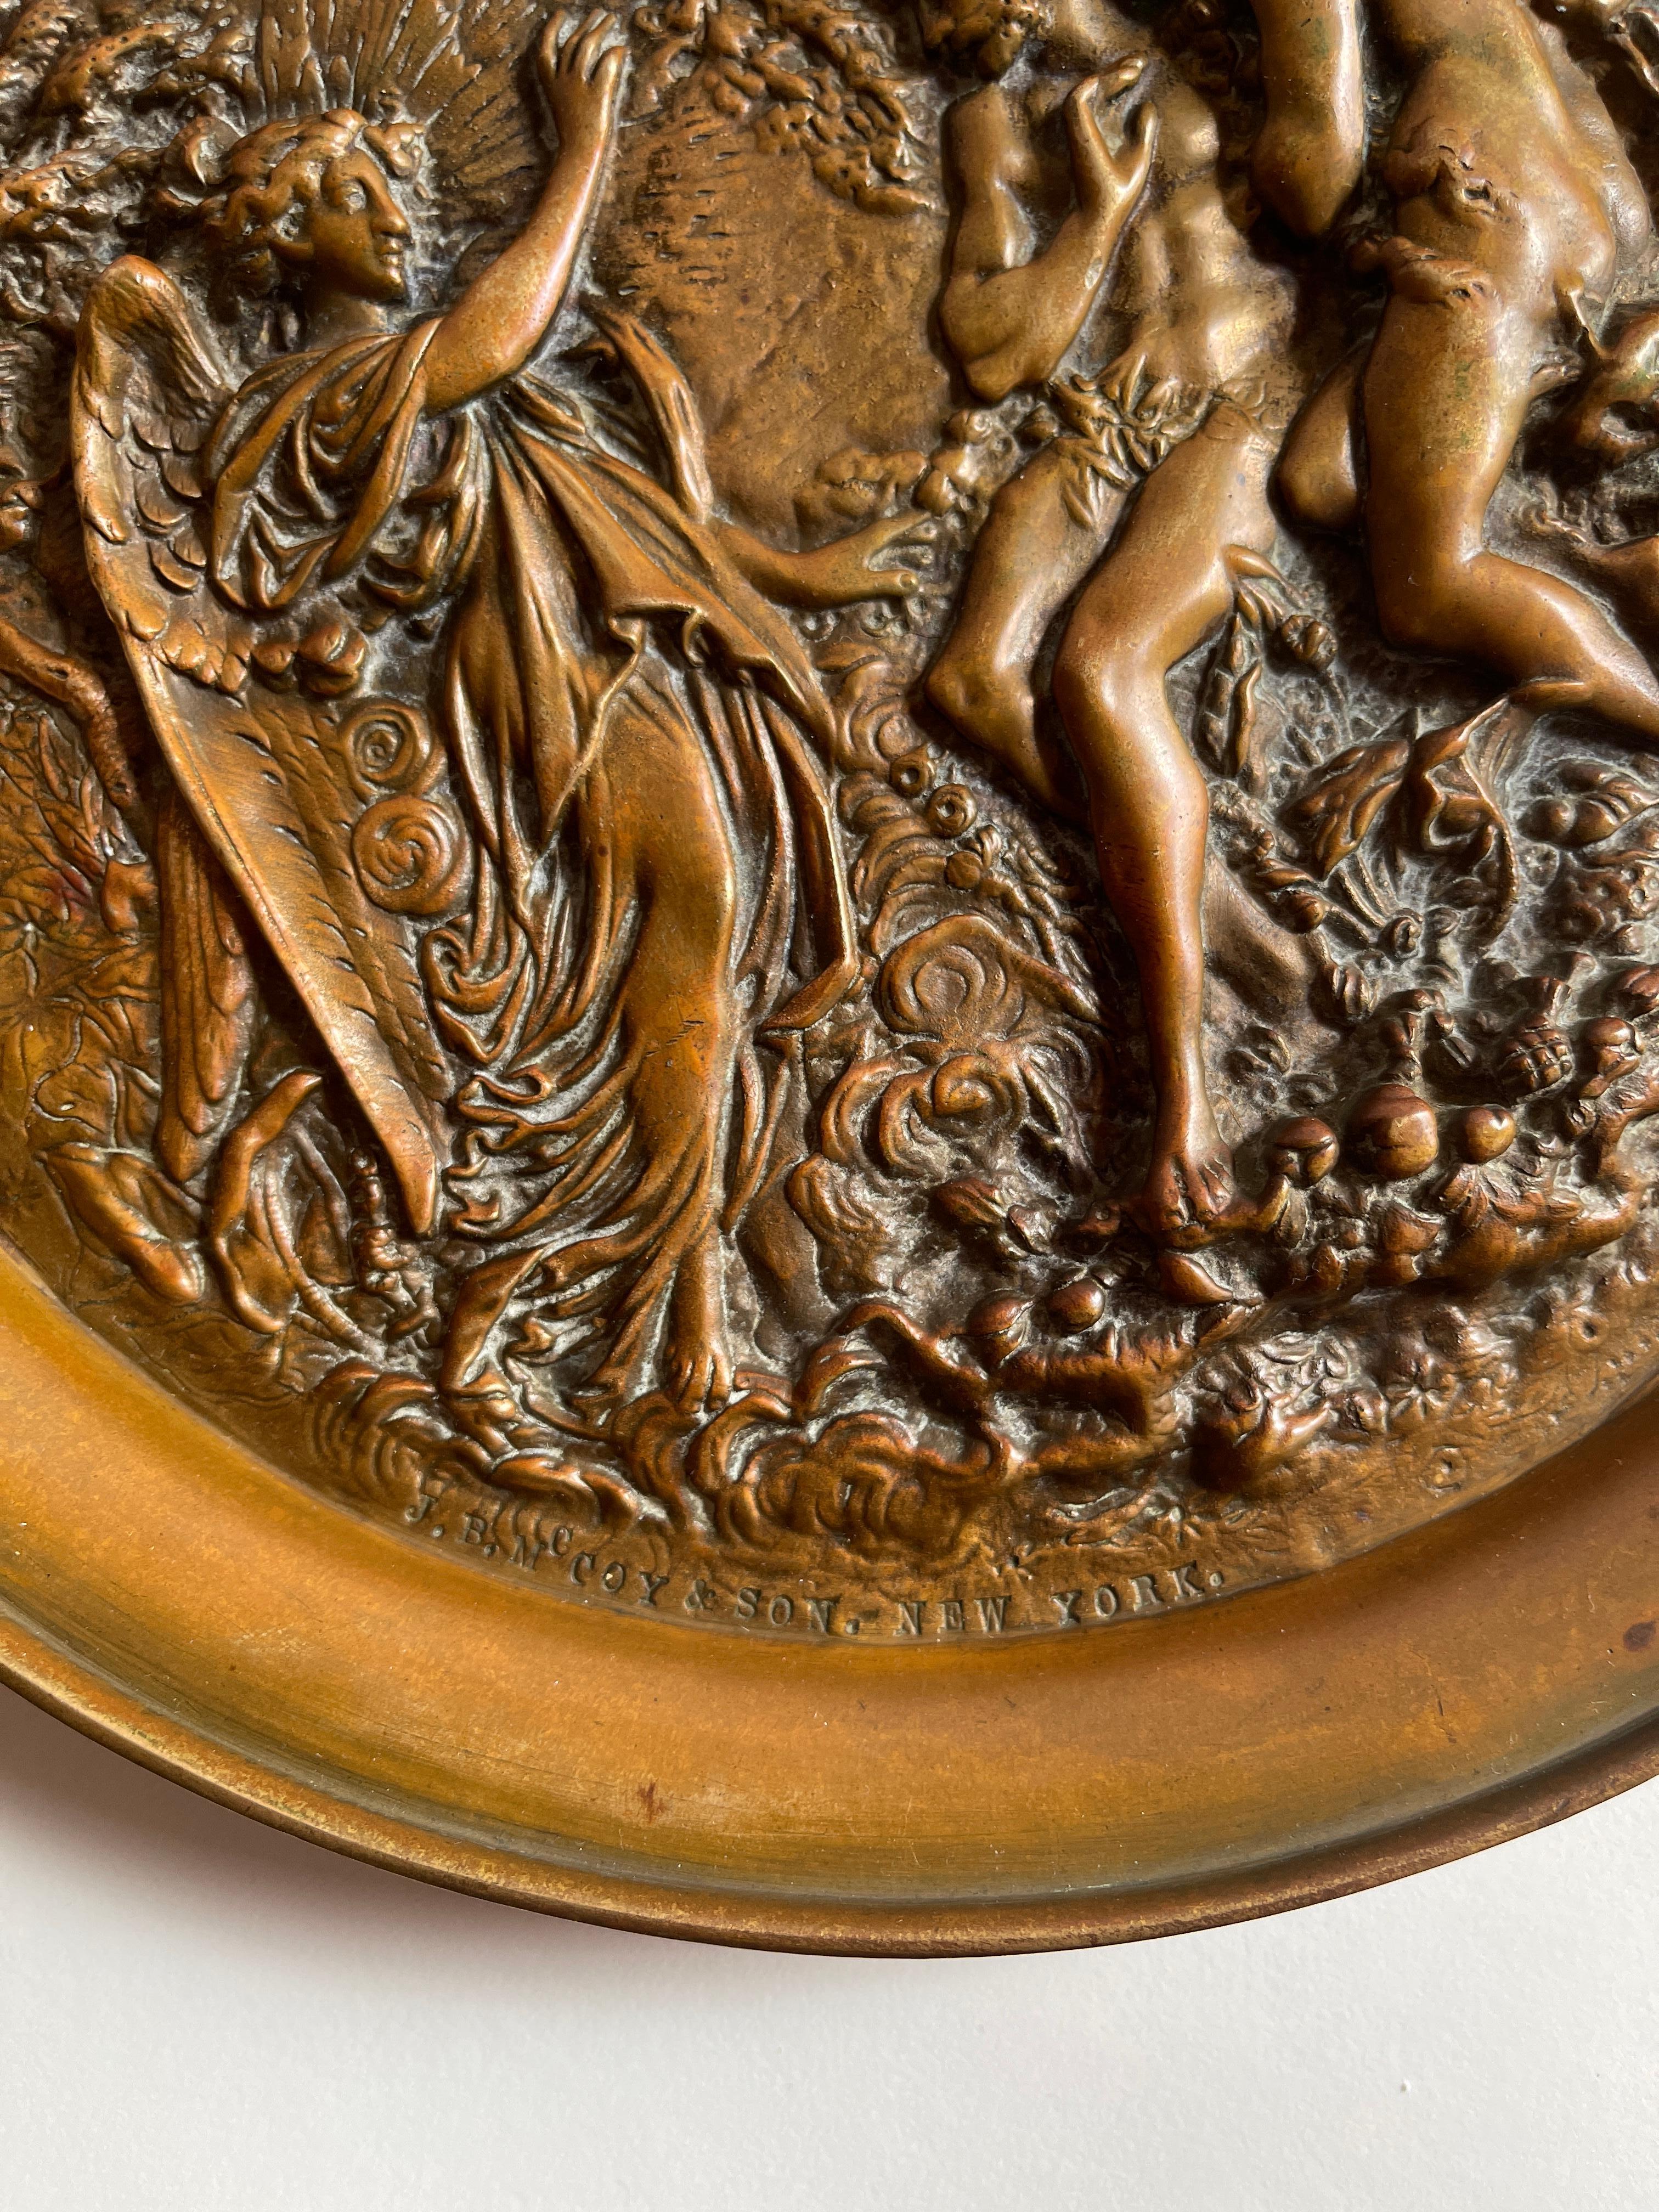 Antique cast bronze hanging plaque with Adam , Eve and the Angel in the Garden of Eden. Finely detailed lush foliage, palm trees, surround the garden. Stamped in lower left rim, J.B. McCoy & Son, New York.
Wire loop for hanging plaque on back side.